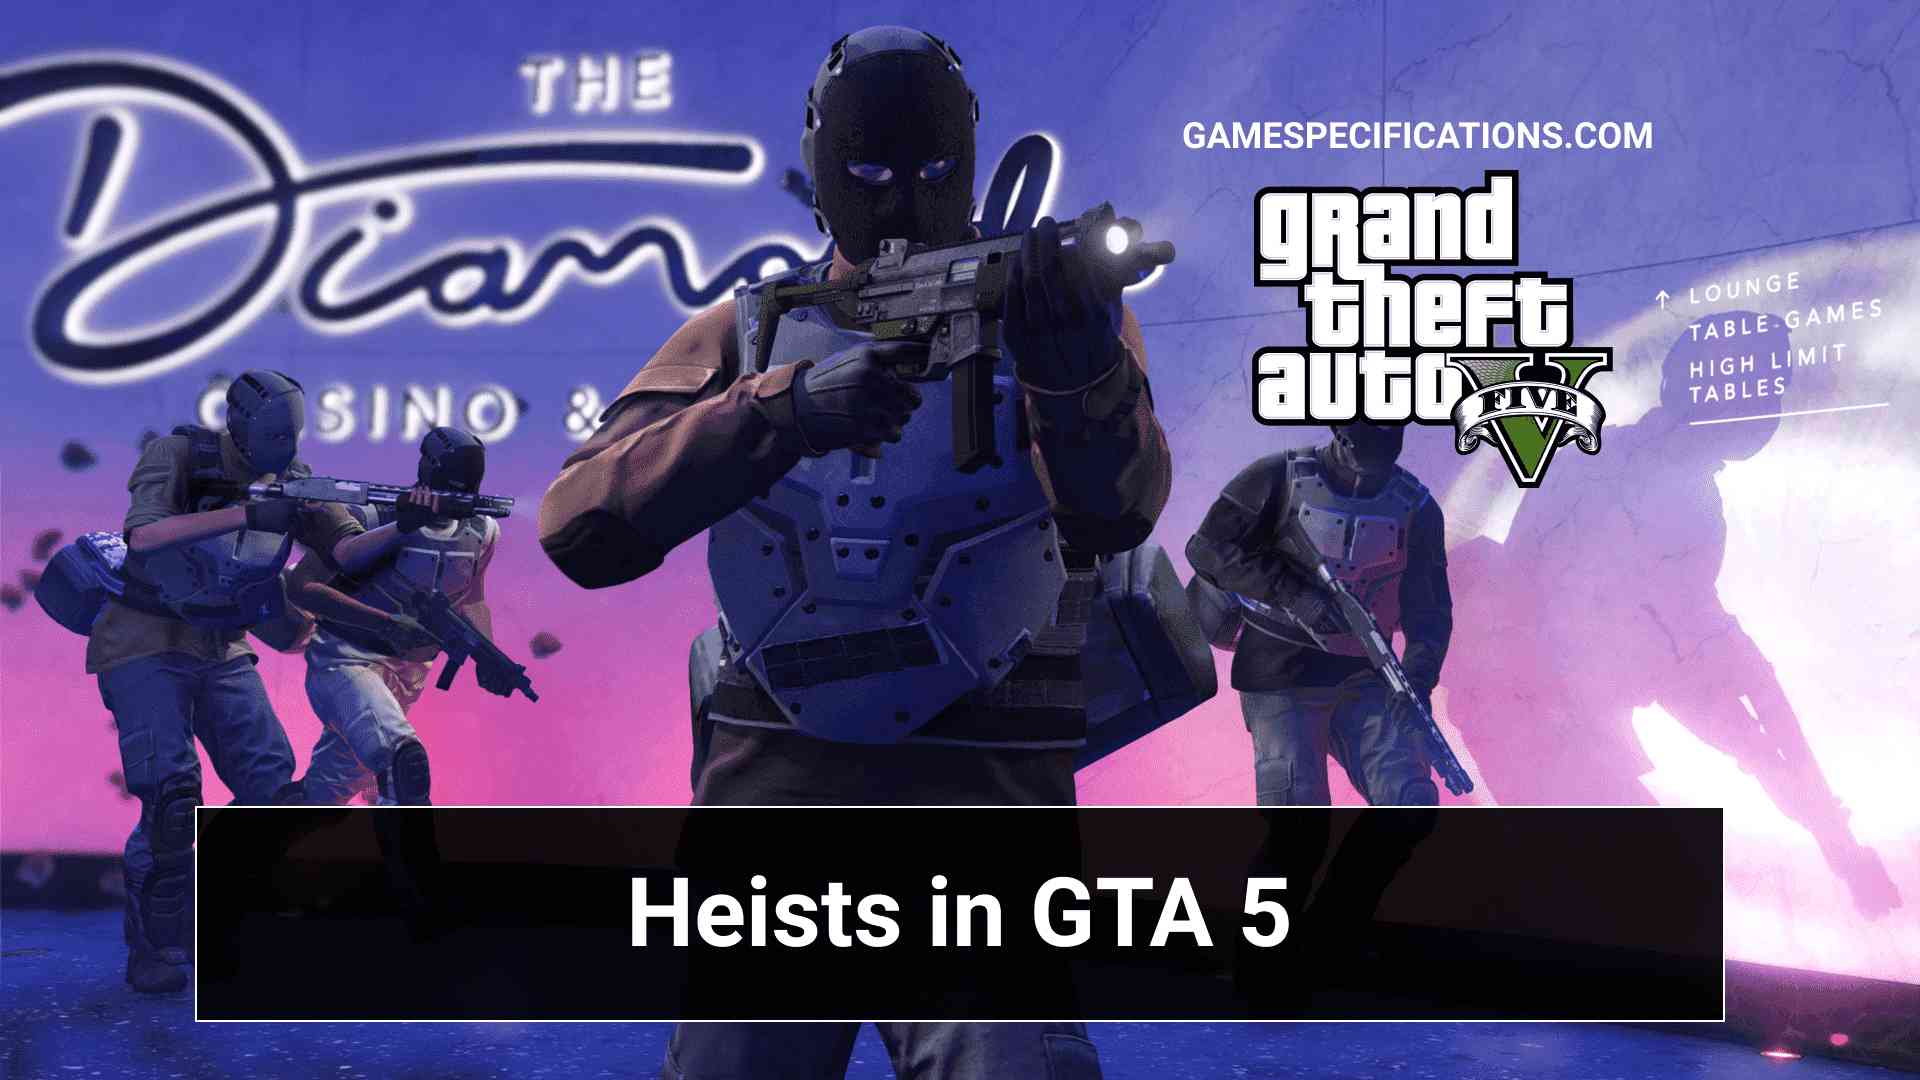 Heists in GTA 5 – All You Need To Know About Exciting Heists Updates